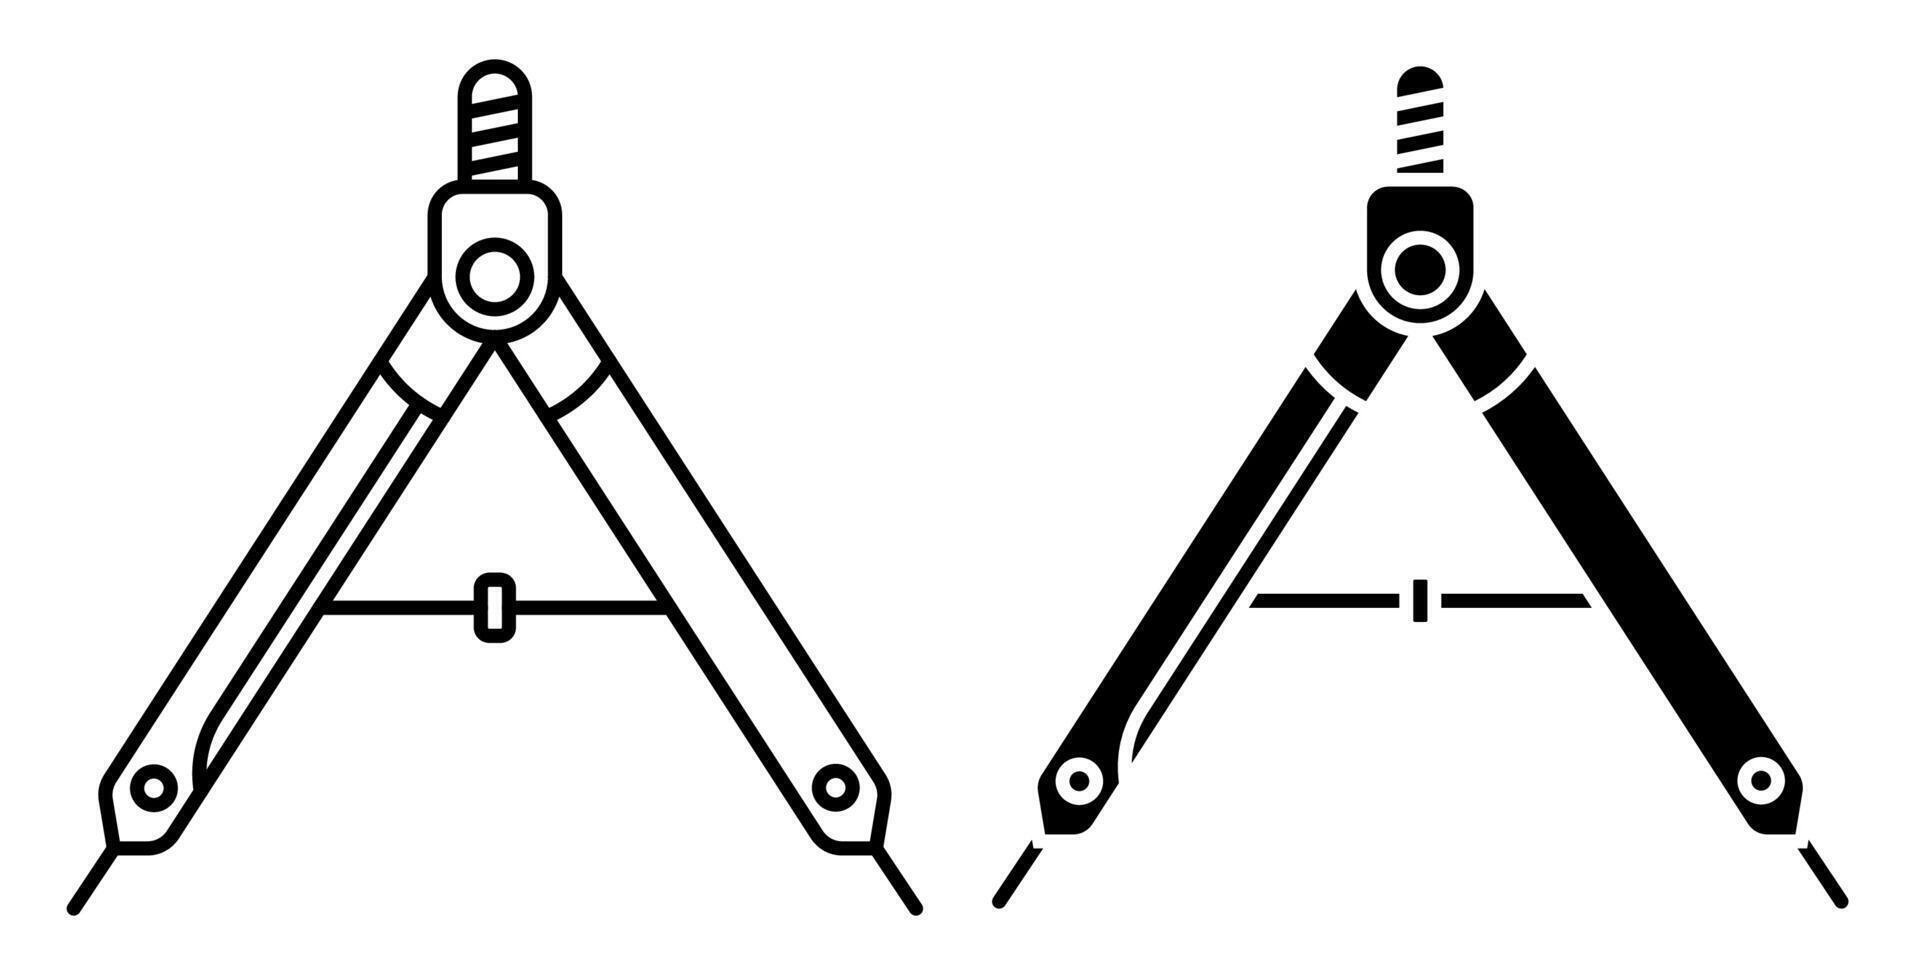 drawing compass, divider for sketching. Engineer and designer tool. Linear icon. Simple black and white vector